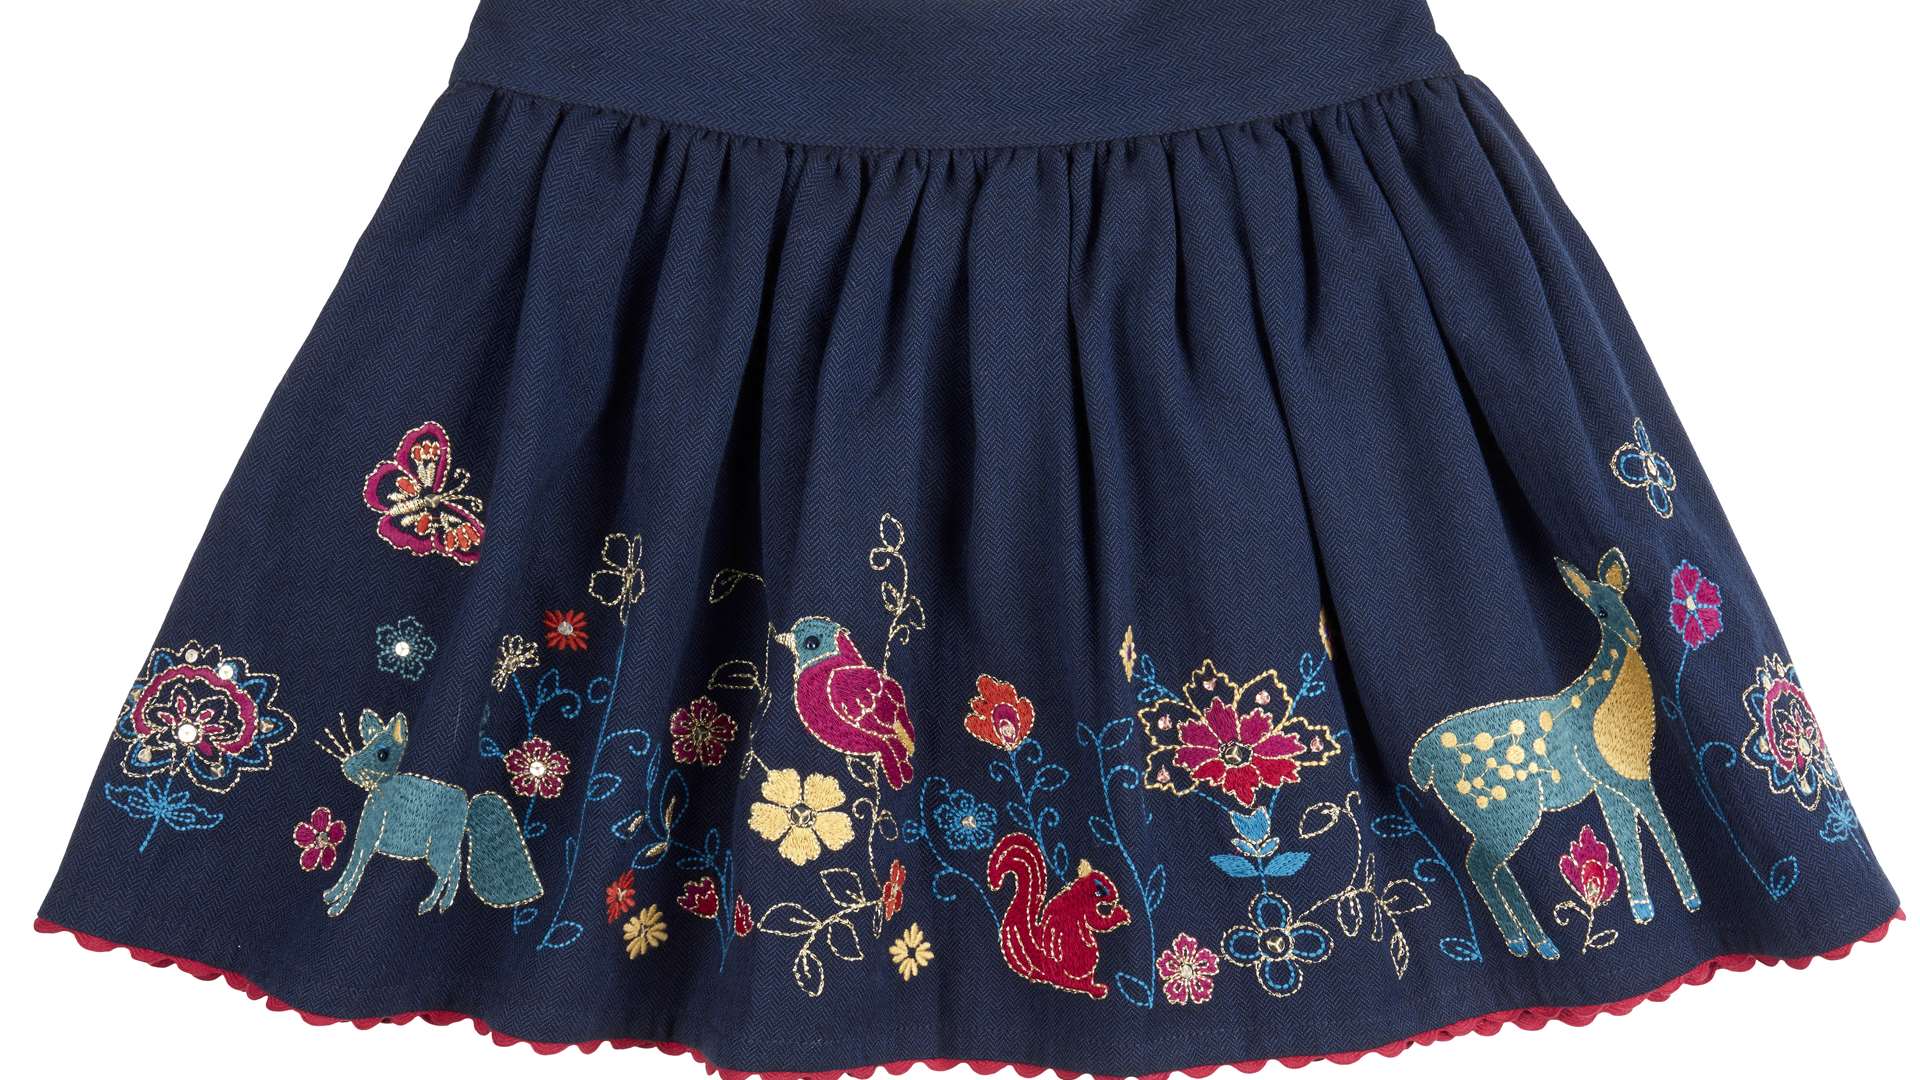 Hedgerow Border Skirt, from £24, at Monsoon